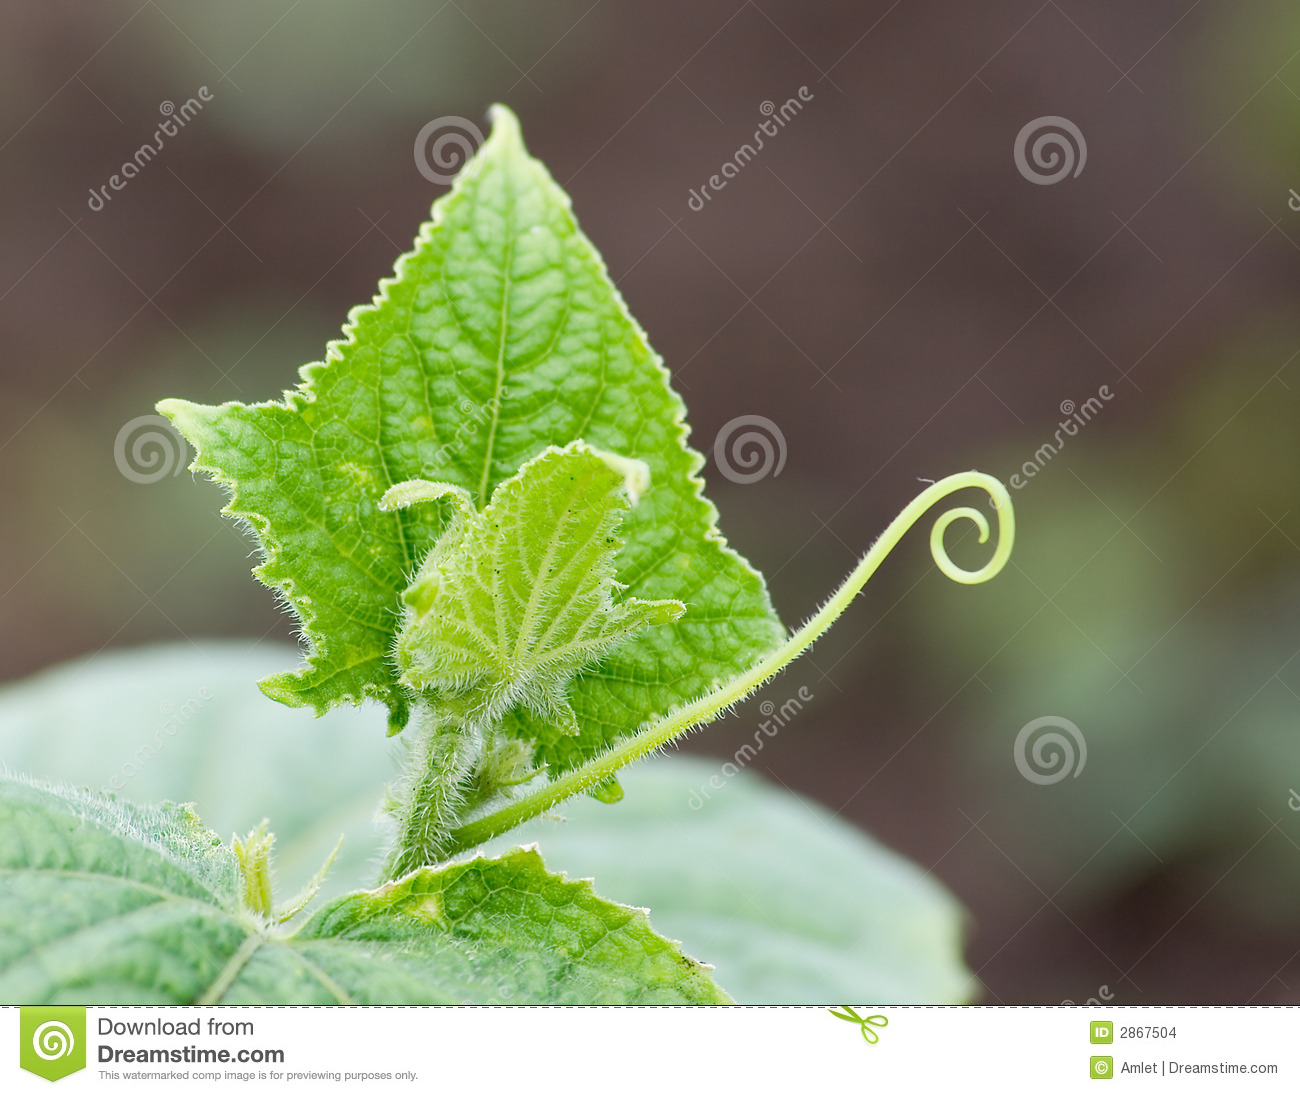 Macro Photo Of A Young Cucumber  A Leaf And A Moustache A Spiral On A